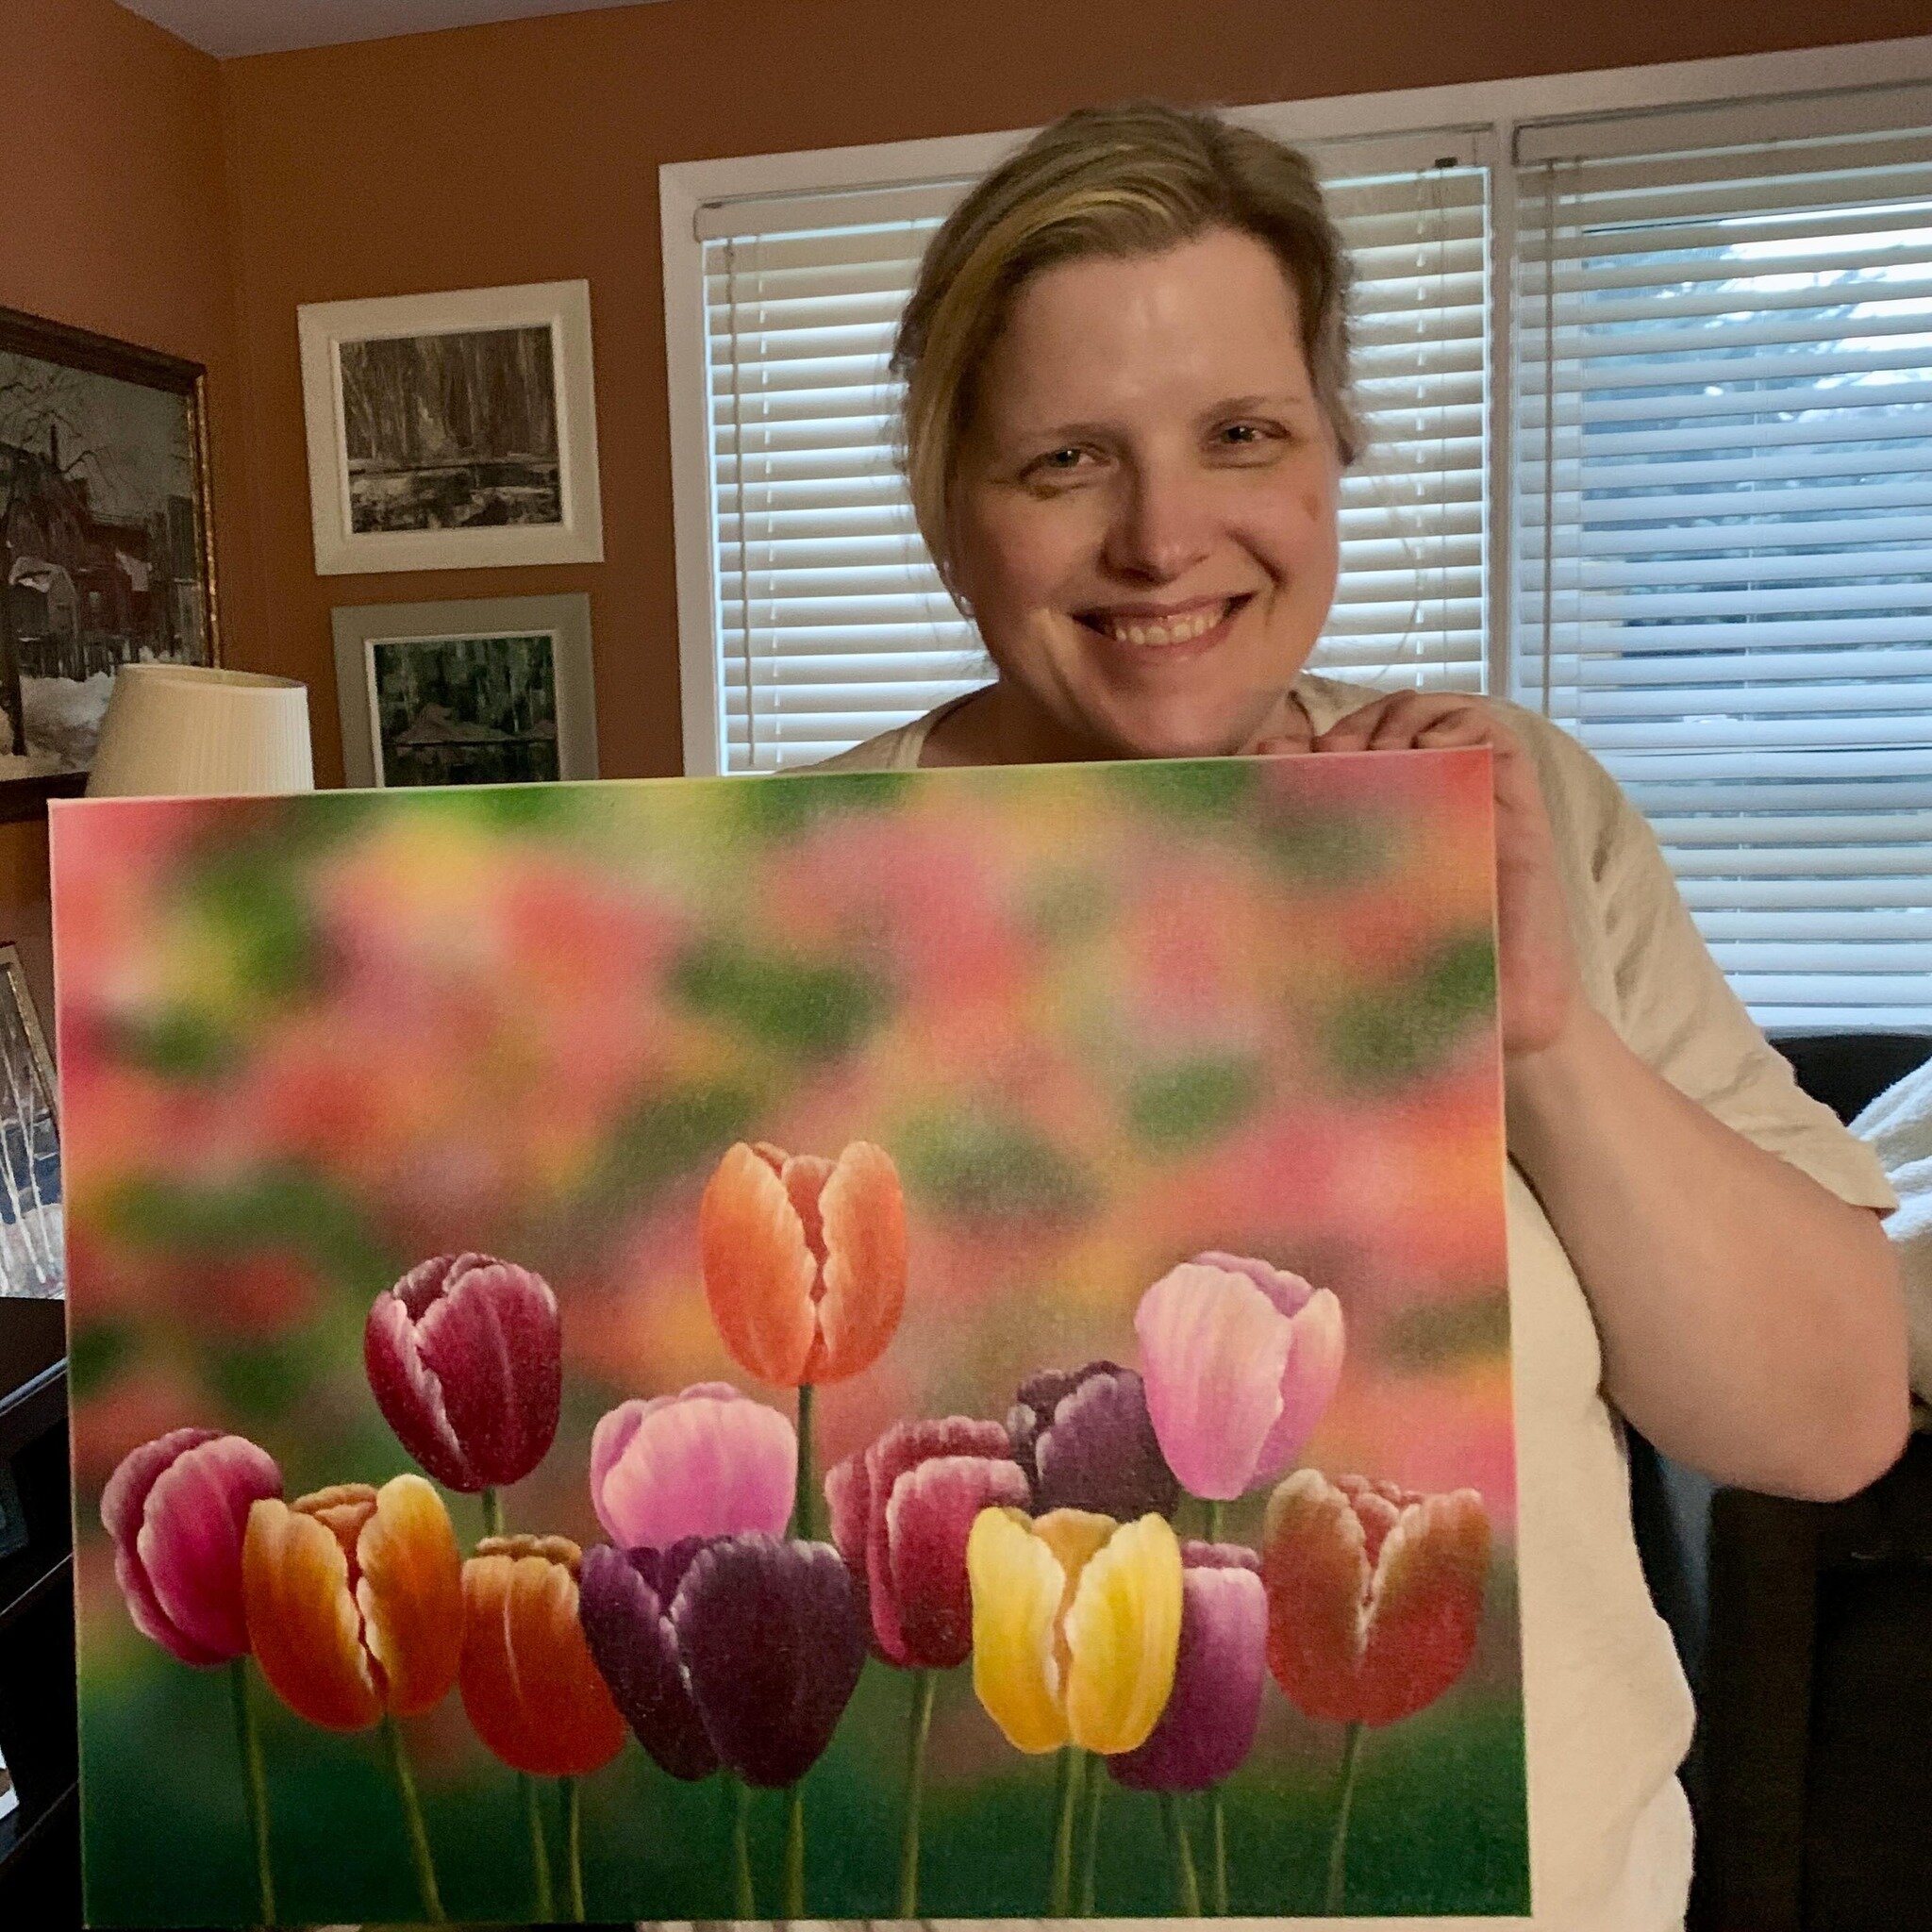 When you wife loves tulips and you know an amazing artist&hellip;. Birthday gift for the win thanks @alicemelofineart